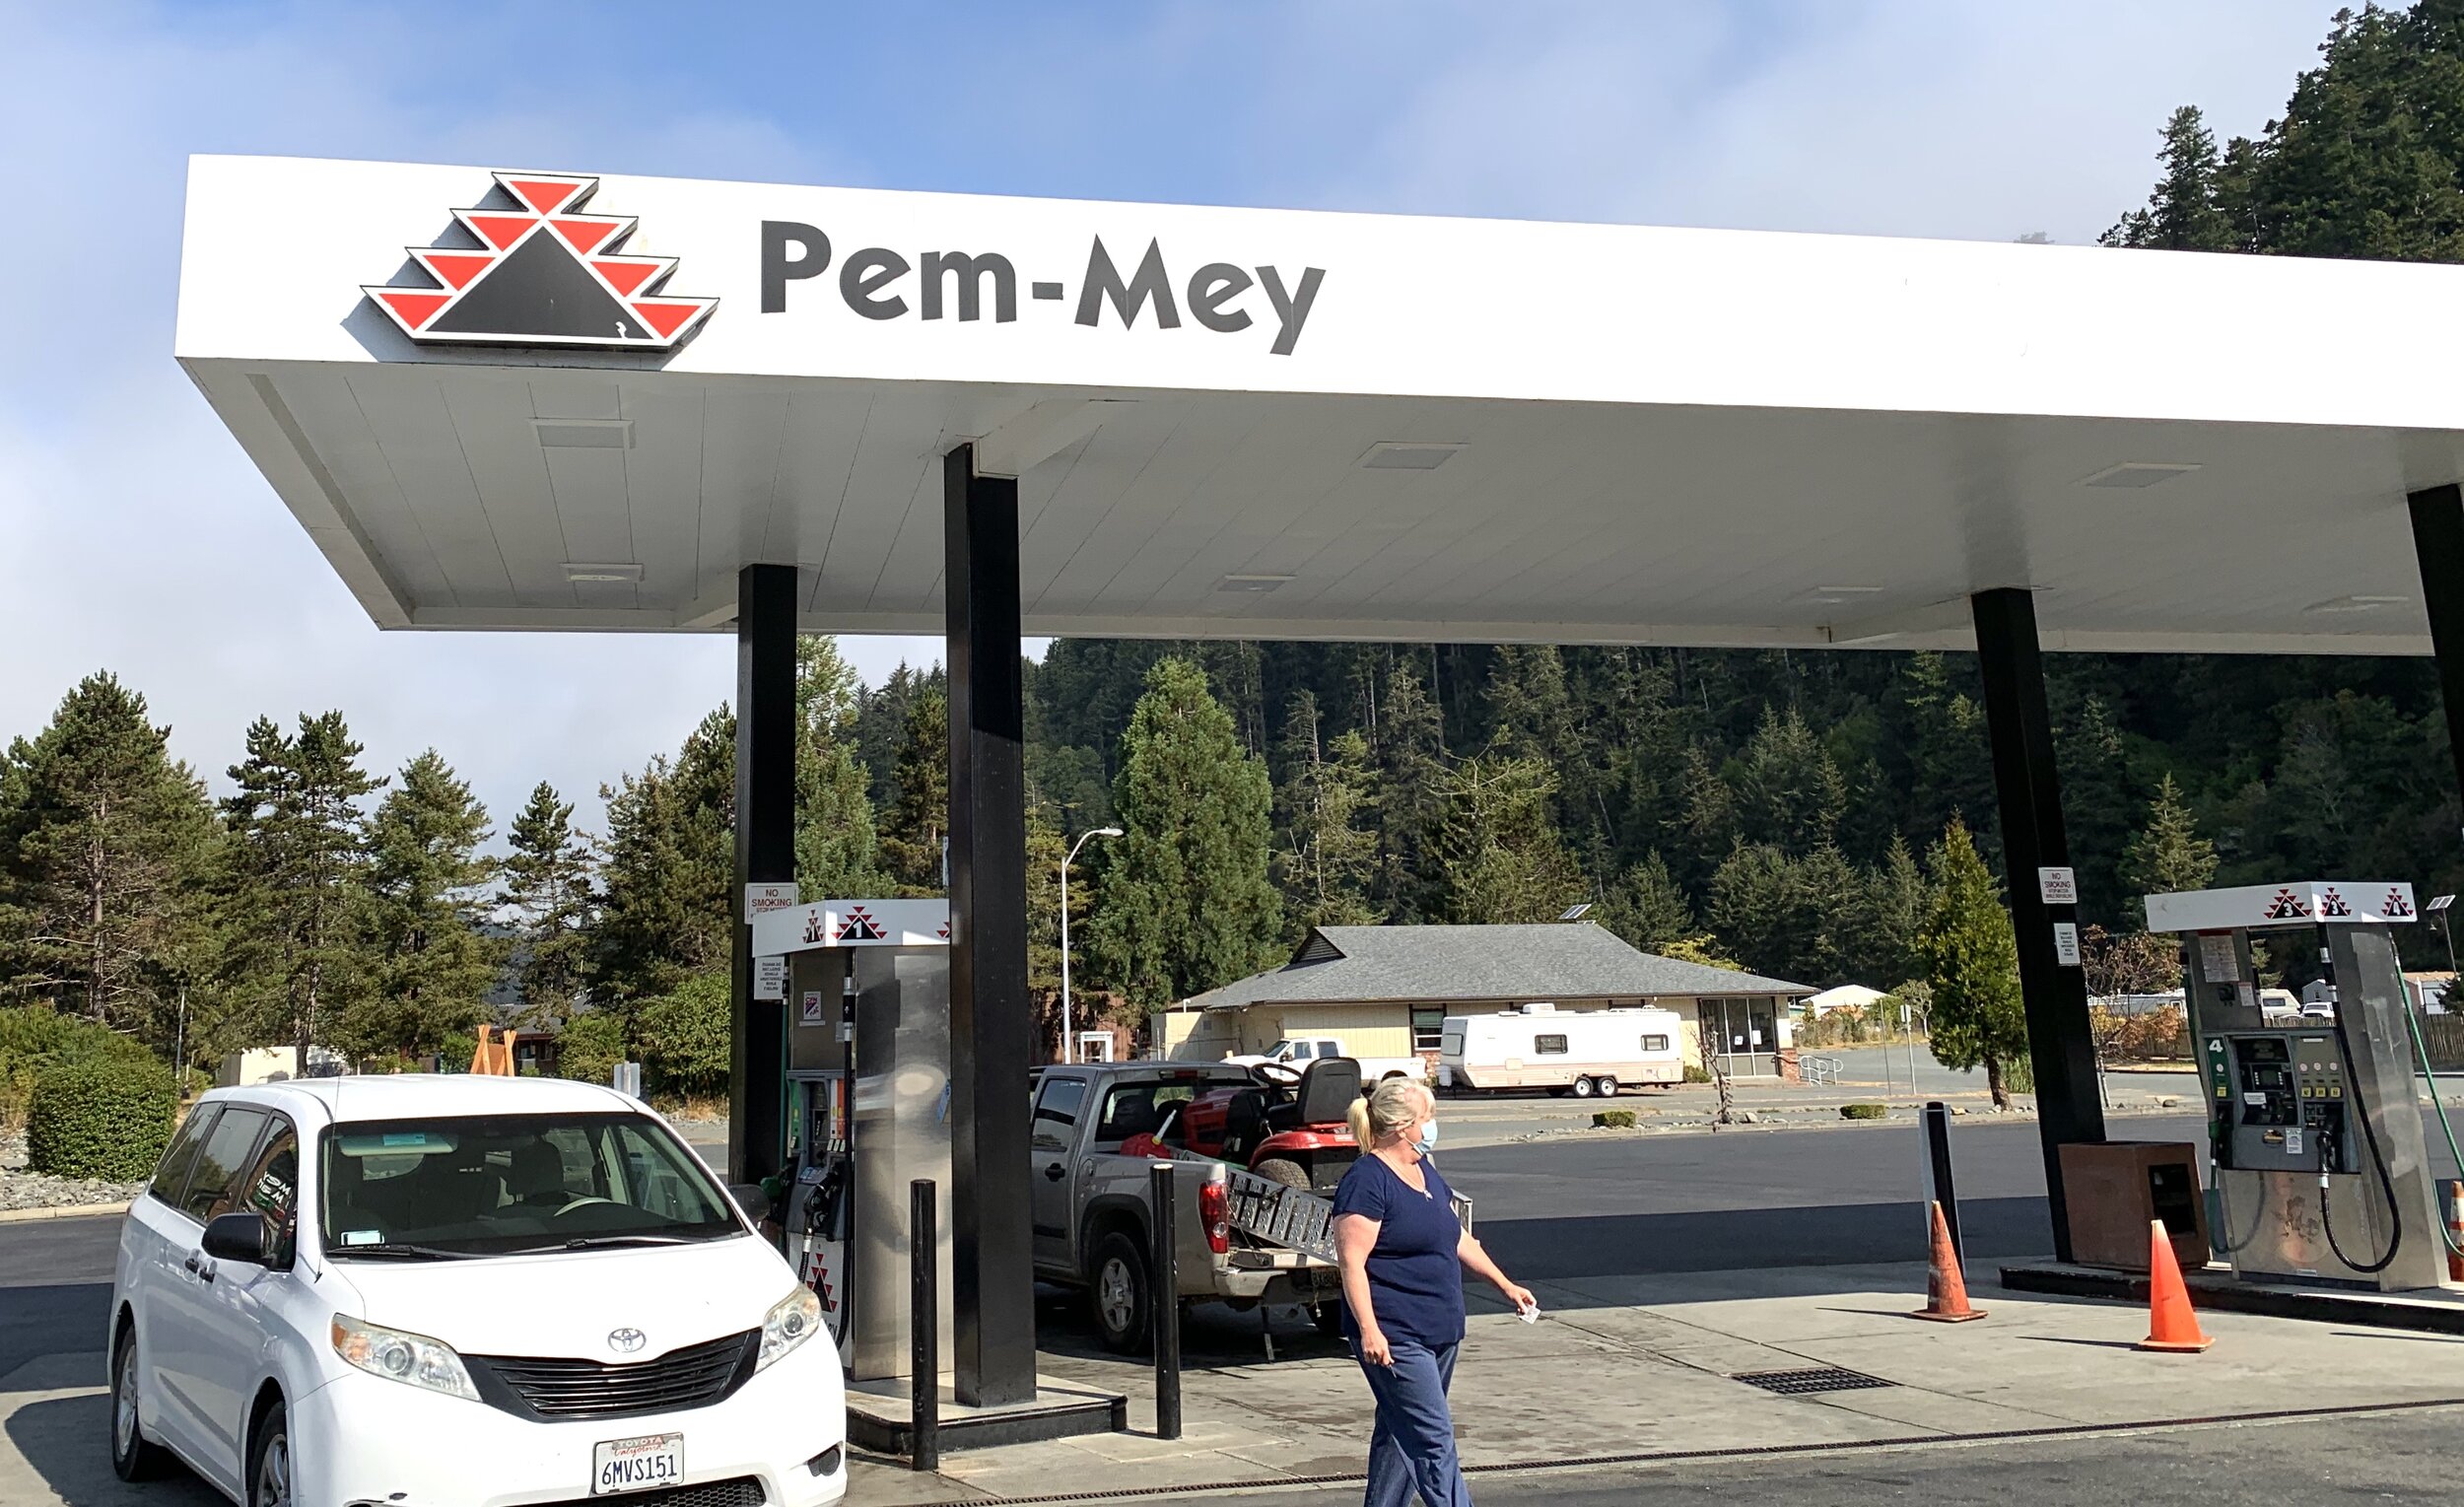  Many new things in the west; getting gas on the  Yurok Indian Reservation  in Klamath, California. Is there any chance Pem-Mey means  QuickTrip?  